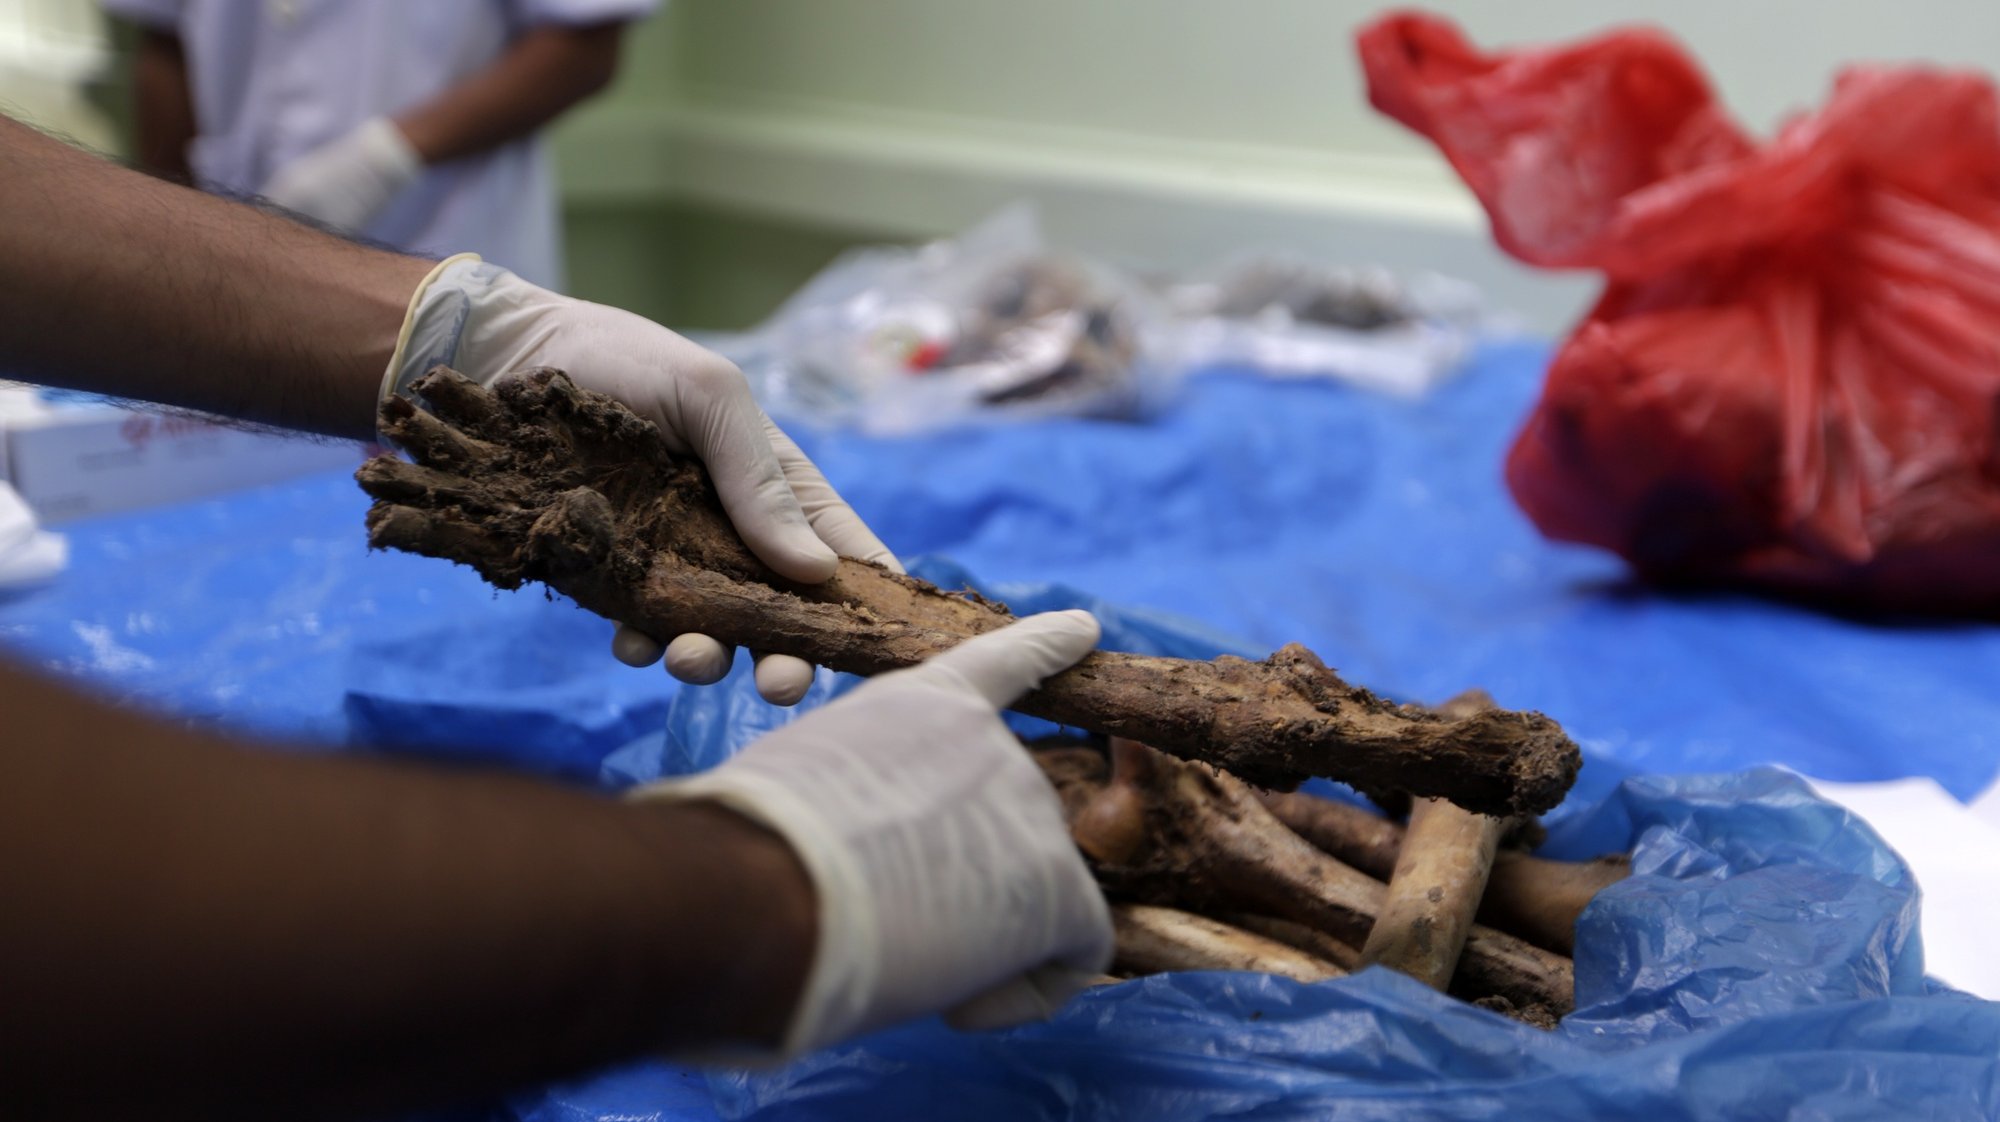 epa08535900 A veterinarian displays seized Sumatran tiger bones at the Aceh Natural Resource office in Aceh, Indonesia 09 July 2020. According to media reports, authorities arrested four suspects on the suspicion of illegal wildlife trading. The animal&#039;s skeleton, skull and skin are estimated to have a value of around 10,000 US dollars on the domestic black market. Tigers are one of the endangered species which suffer the most from illegal wildlife trafficking in Indonesia.  EPA/HOTLI SIMANJUNTAK